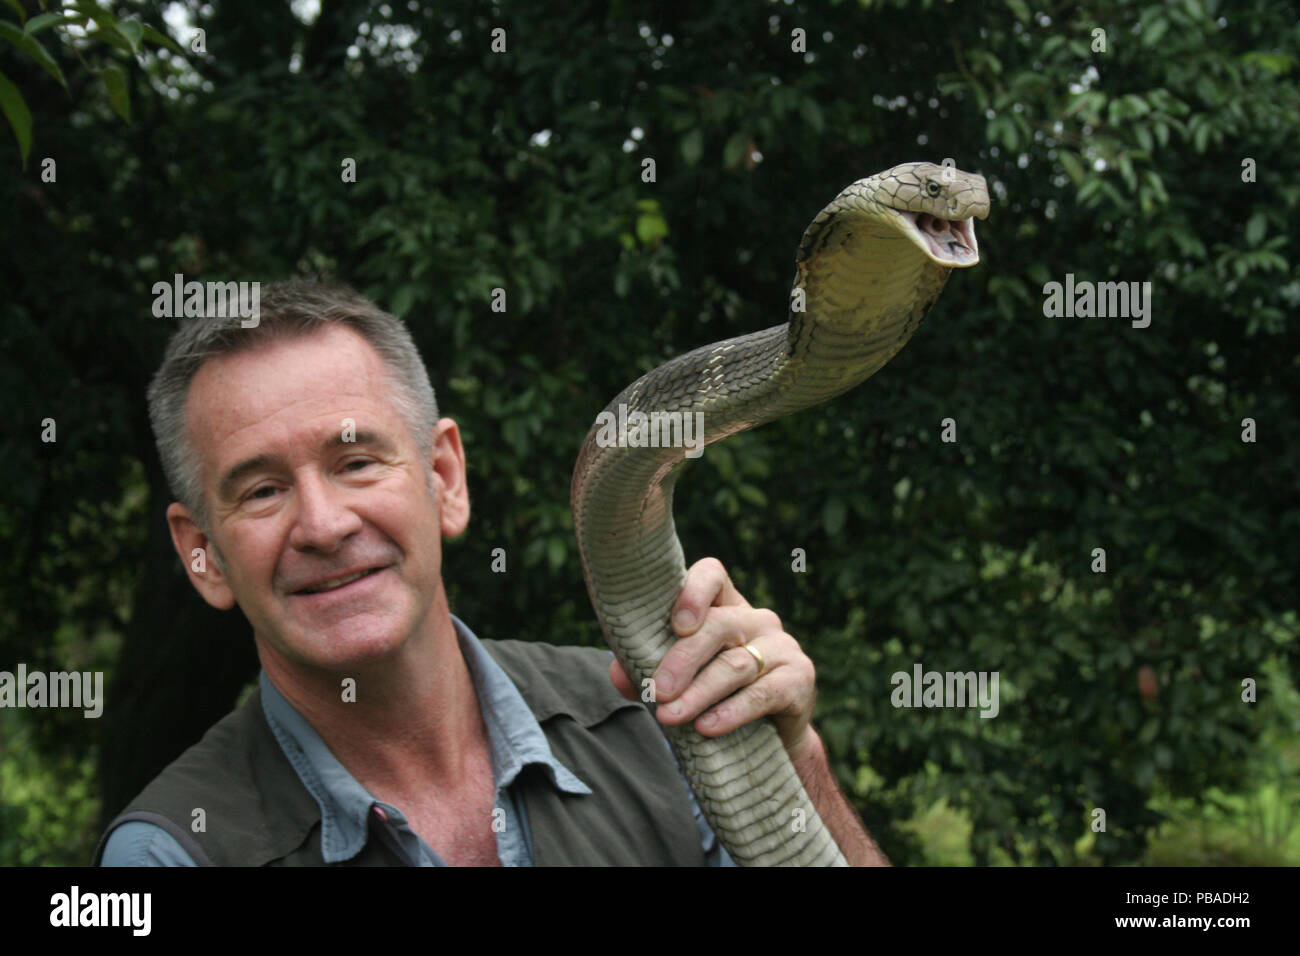 Presenter Nigel Marven holding King cobra (Ophiophagus hannah) China, May 2013. Model released. Stock Photo